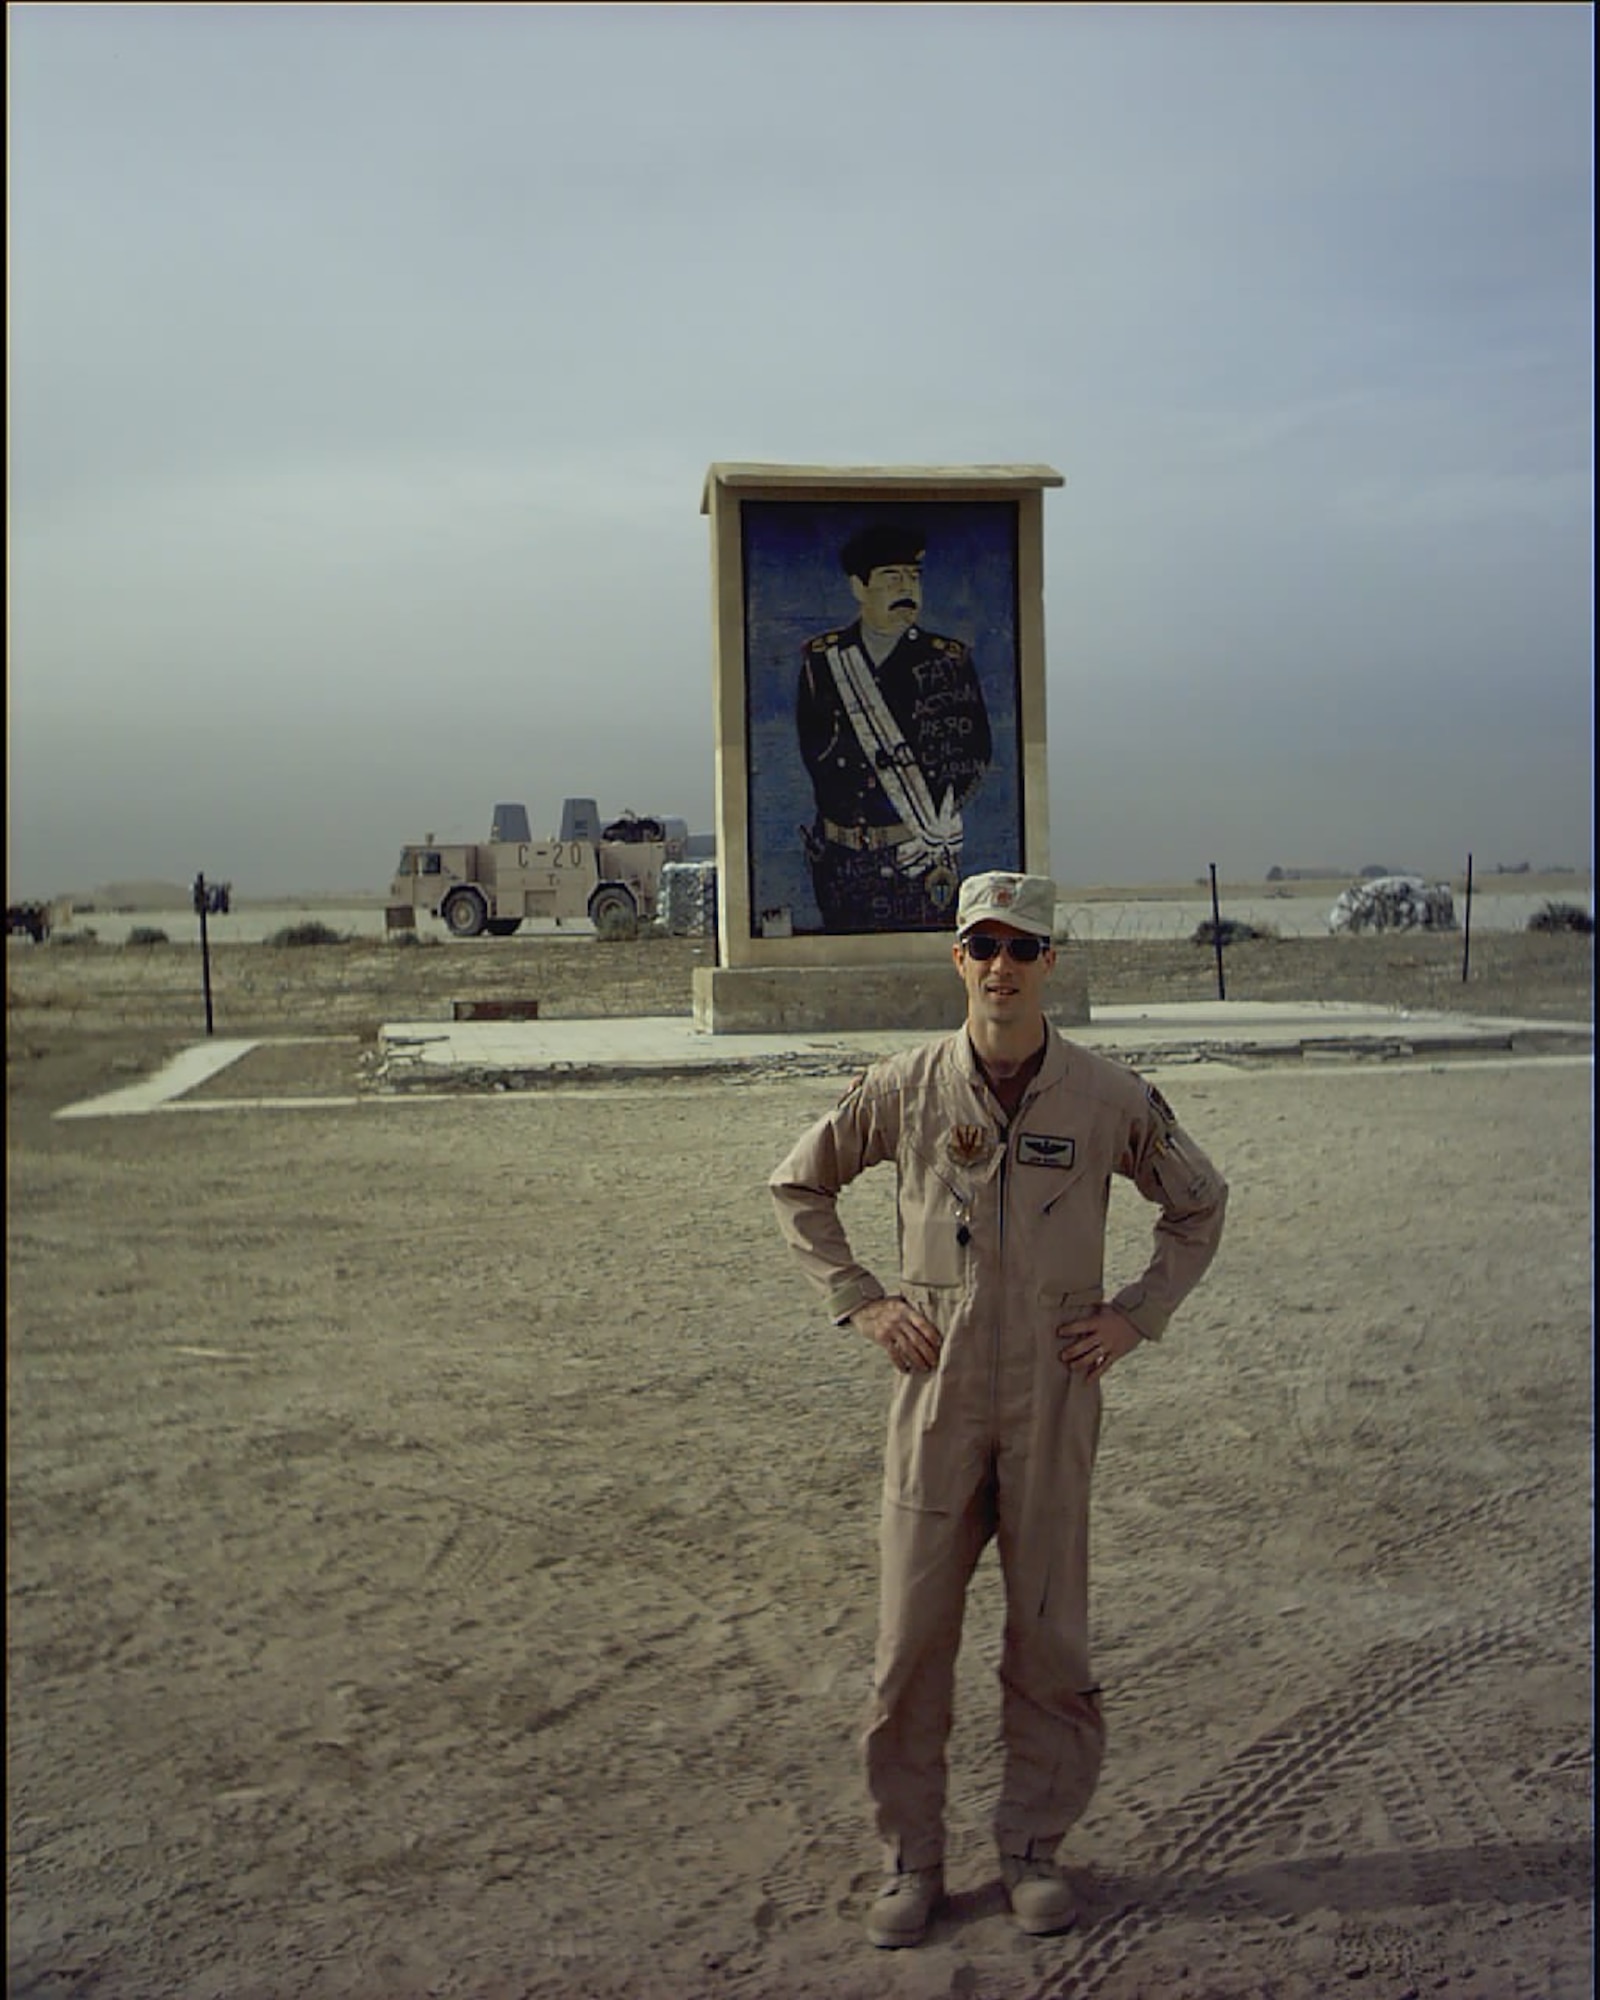 U.S. Air Force Maj. John Marks, 303rd Fighter Squadron pilot, poses in front of a Saddam sign near Tallil Air Base, Iraq, during Operation Iraqi Freedom in 2003. Other bases Marks has deployed to in support of Operation Iraqi Freedom include Ahmed Al Jaber AB, Kuwait, and Kirkuk AB, Iraq. (Courtesy photo provided by Lt. Col. Marks)